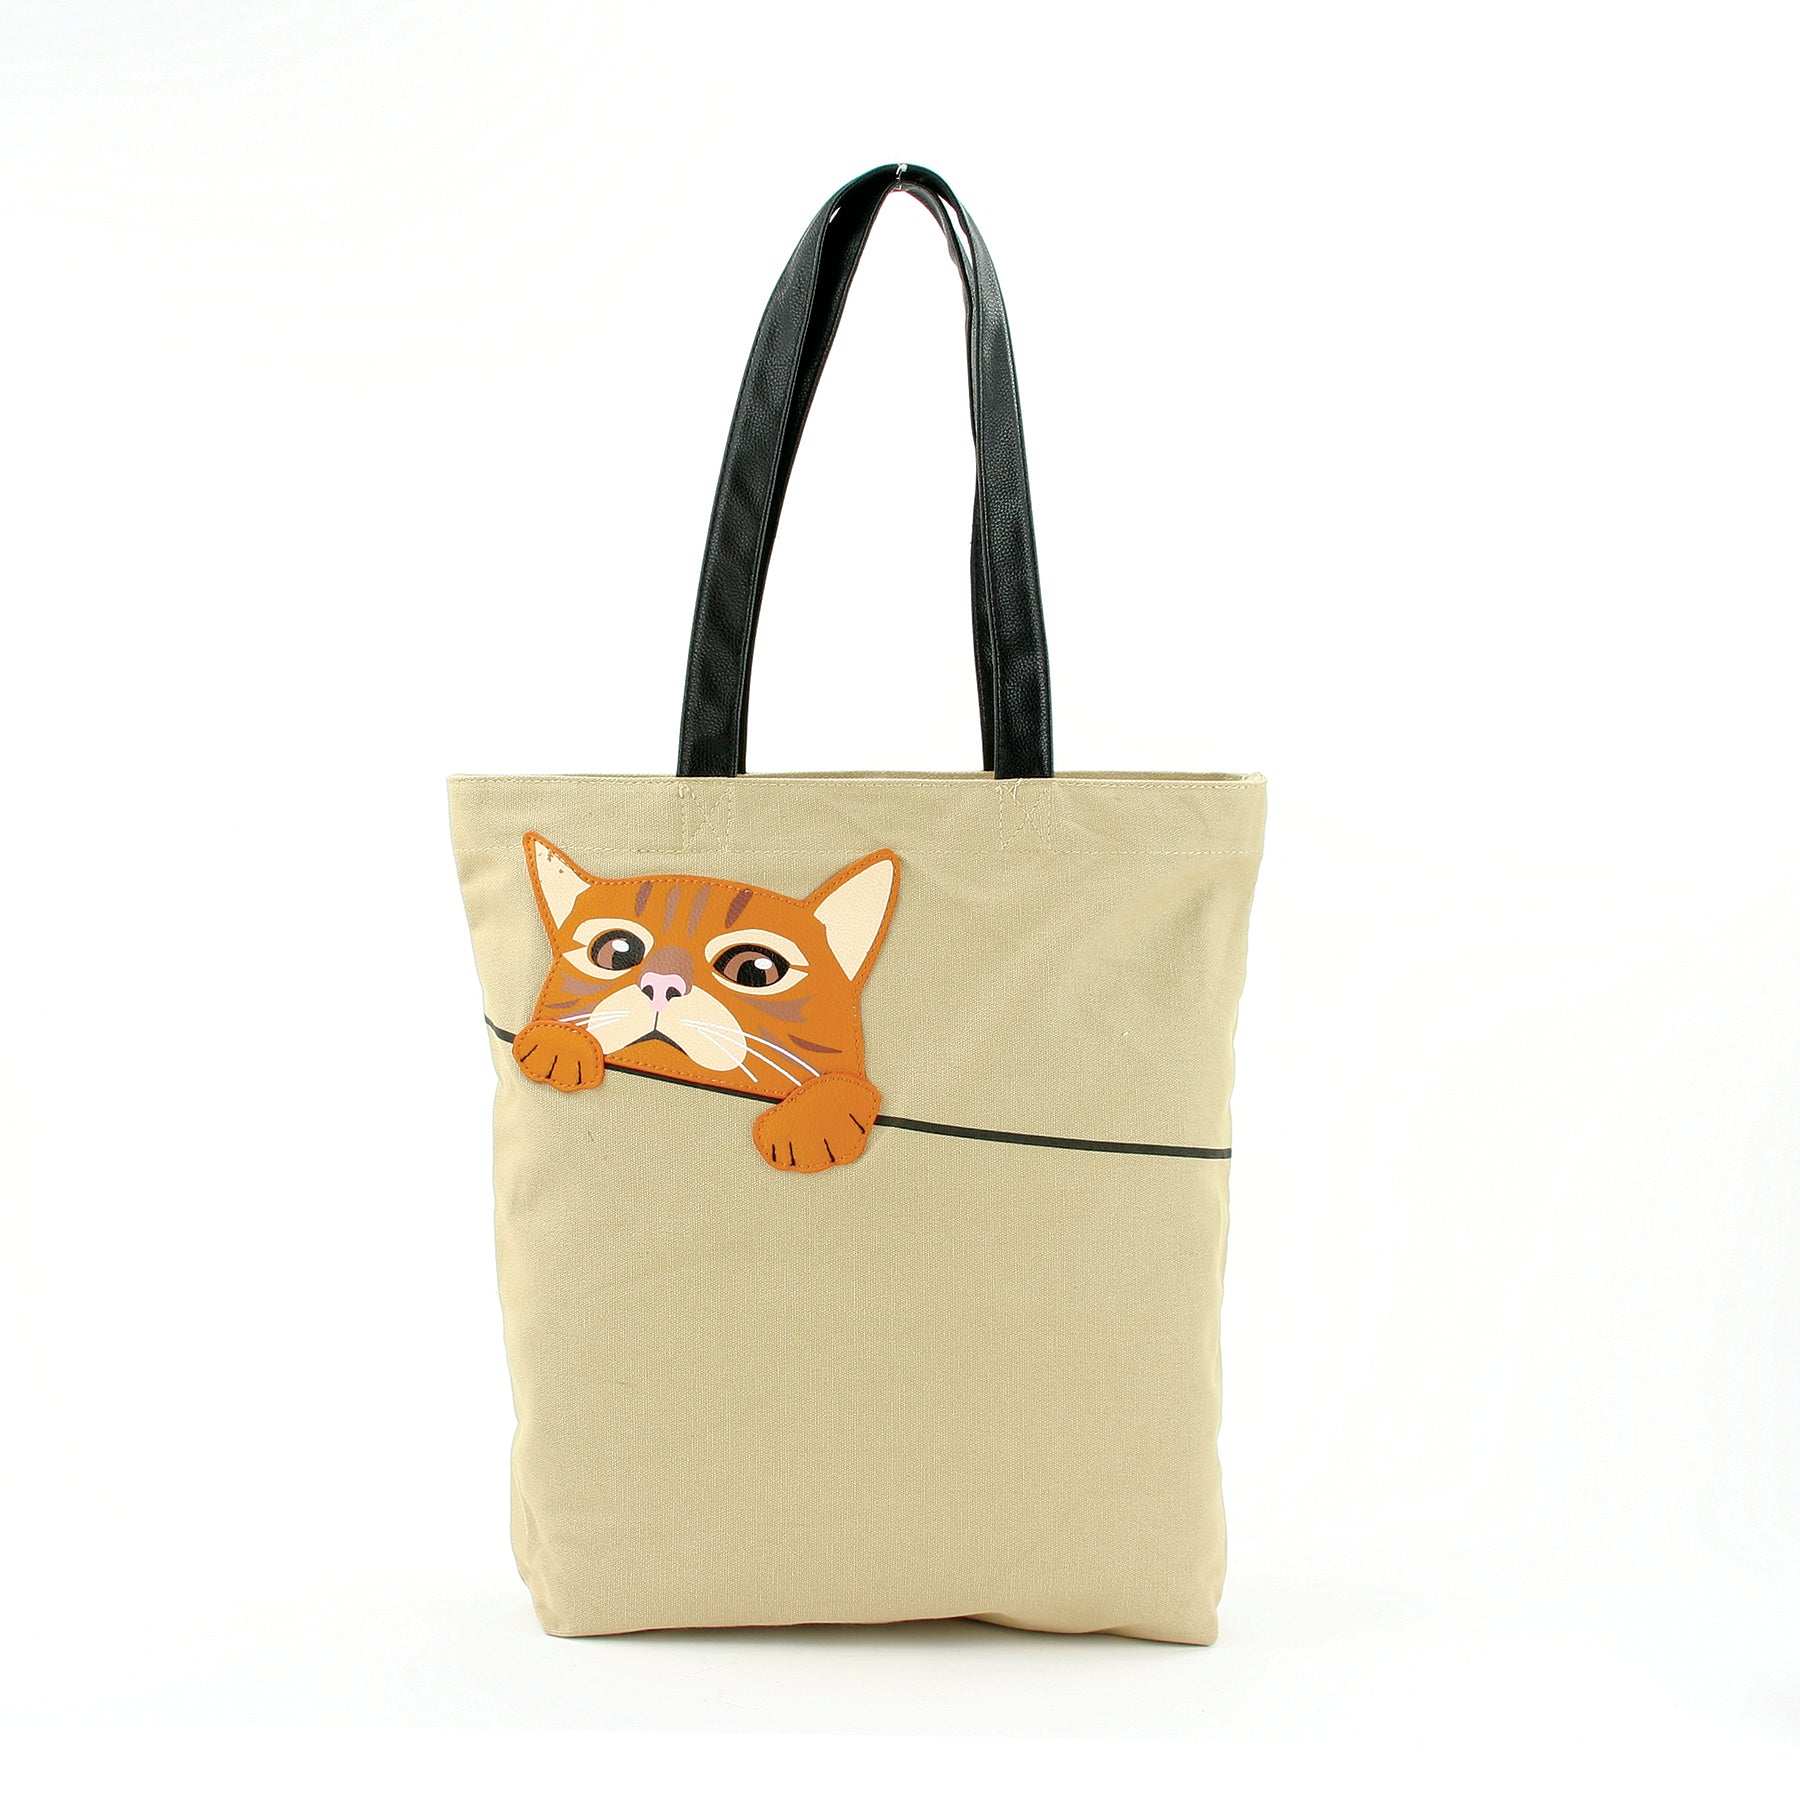 Peeking Tabby Tote Bag in Canvas Material front view